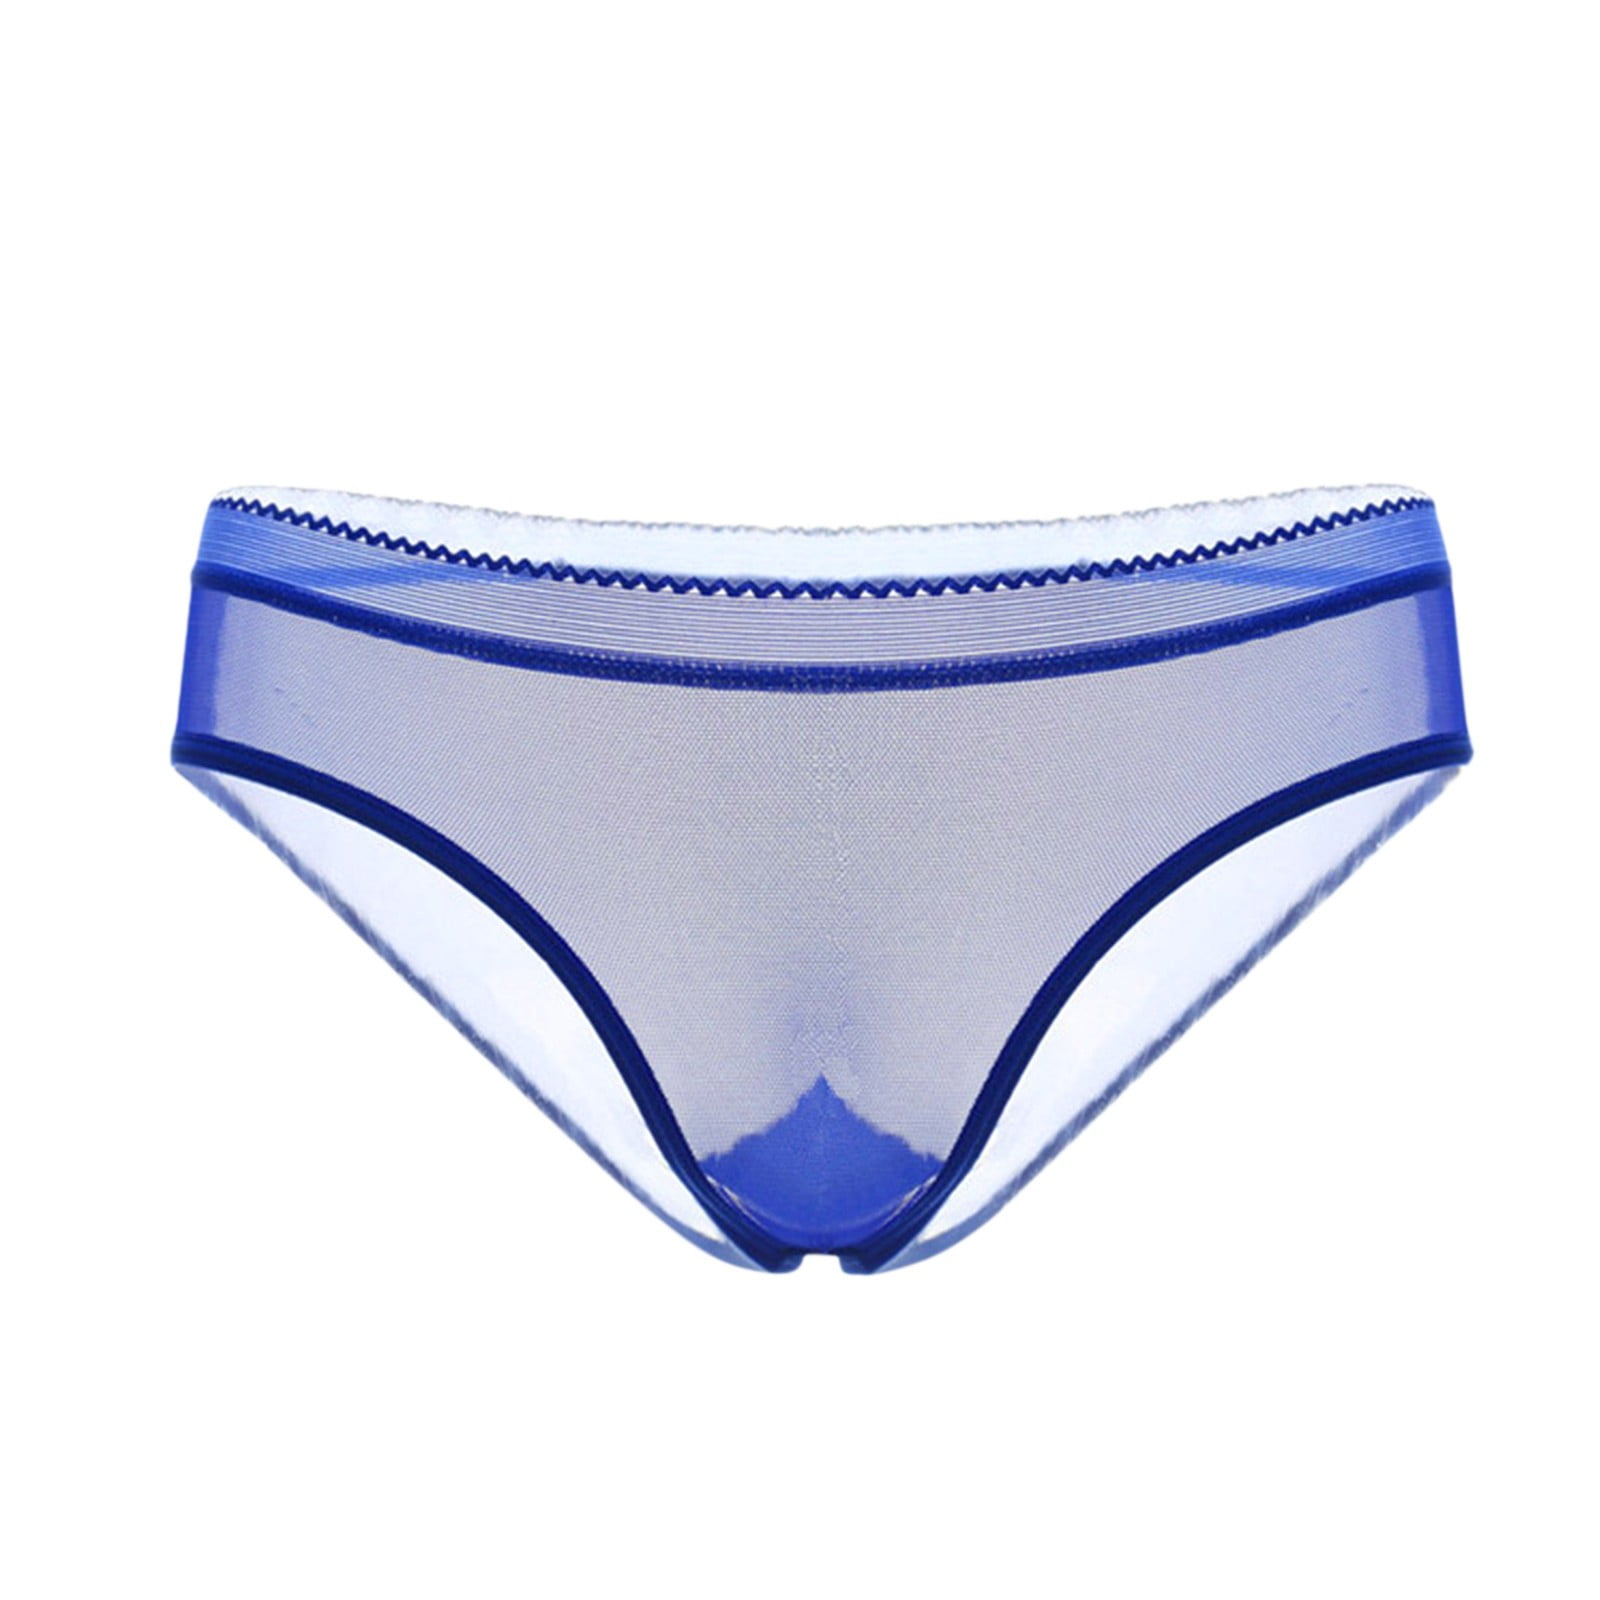 Womens Ultra Thin Nylon Briefs Comfortable, Transparent Mesh Underwear In  Solid Colors, S3005 From Hsaiiou, $4.59